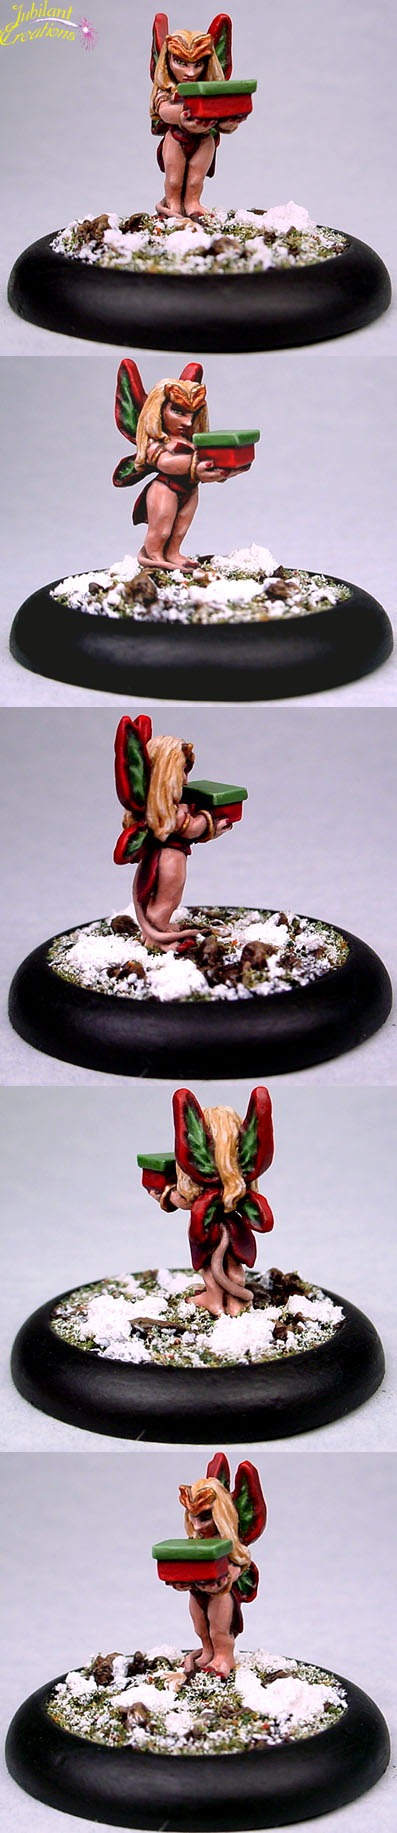 Image of Snow Bases - Tips & Advice (snow-tex)